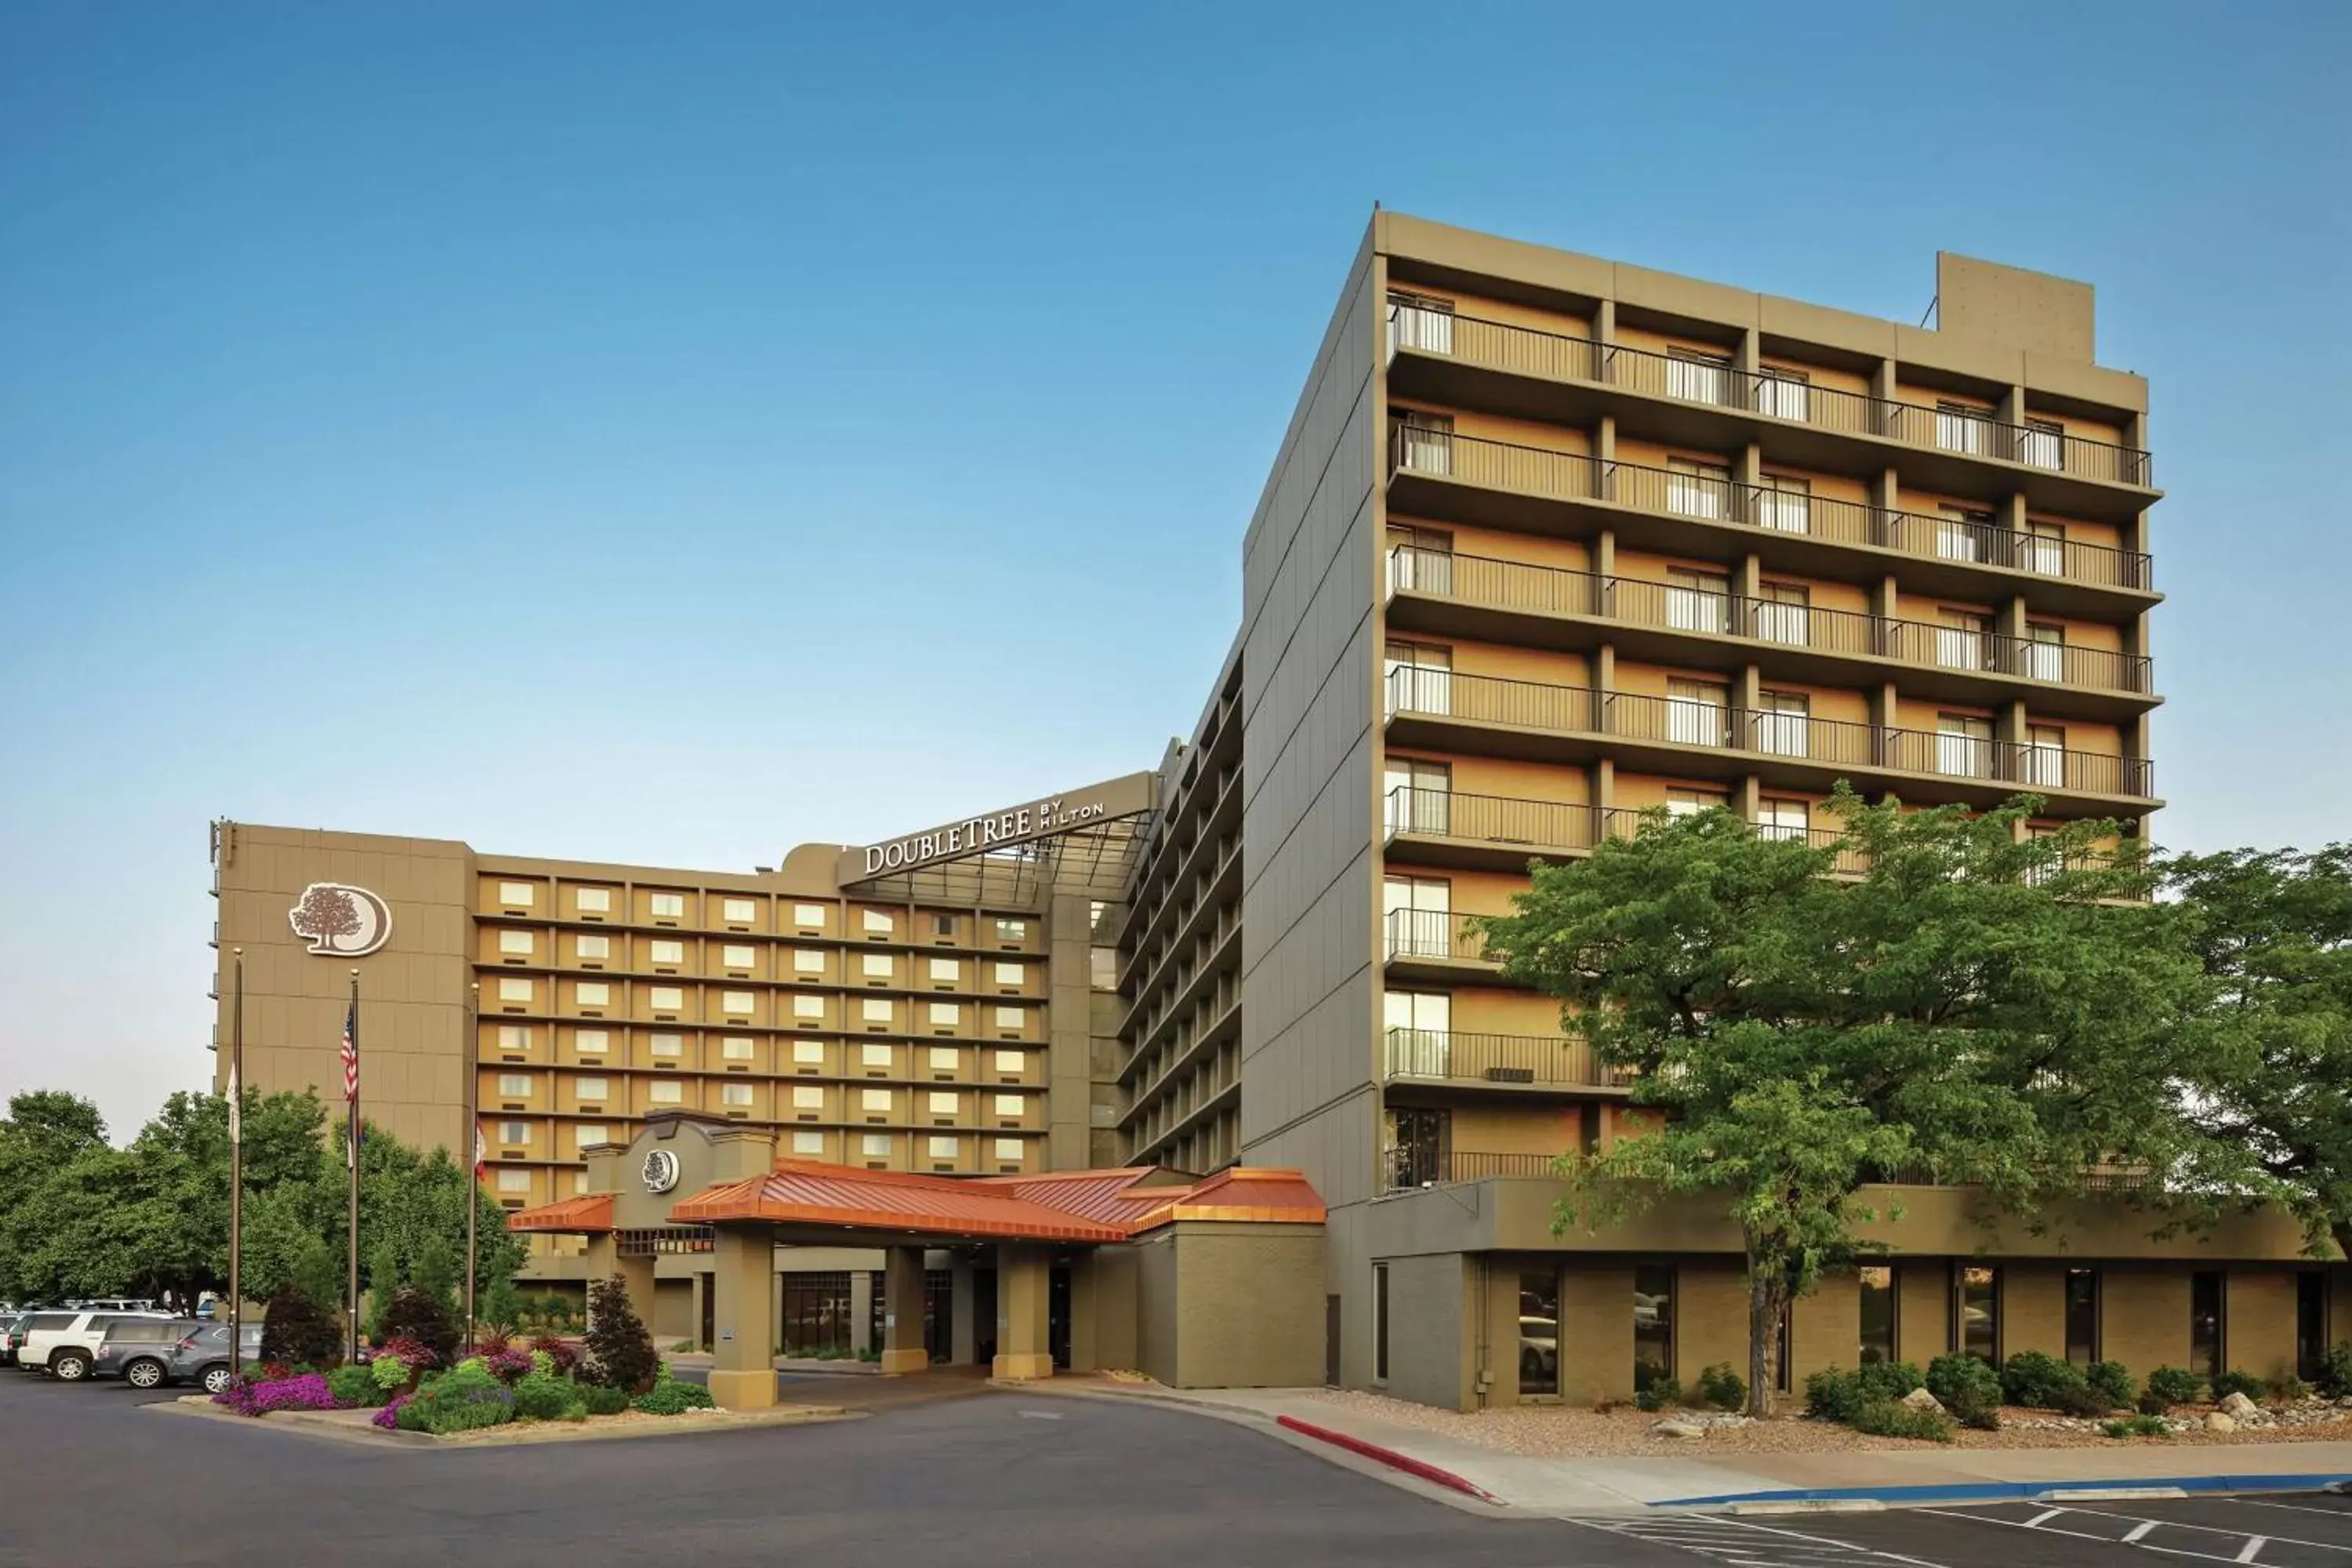 Property Building in DoubleTree by Hilton Hotel Denver